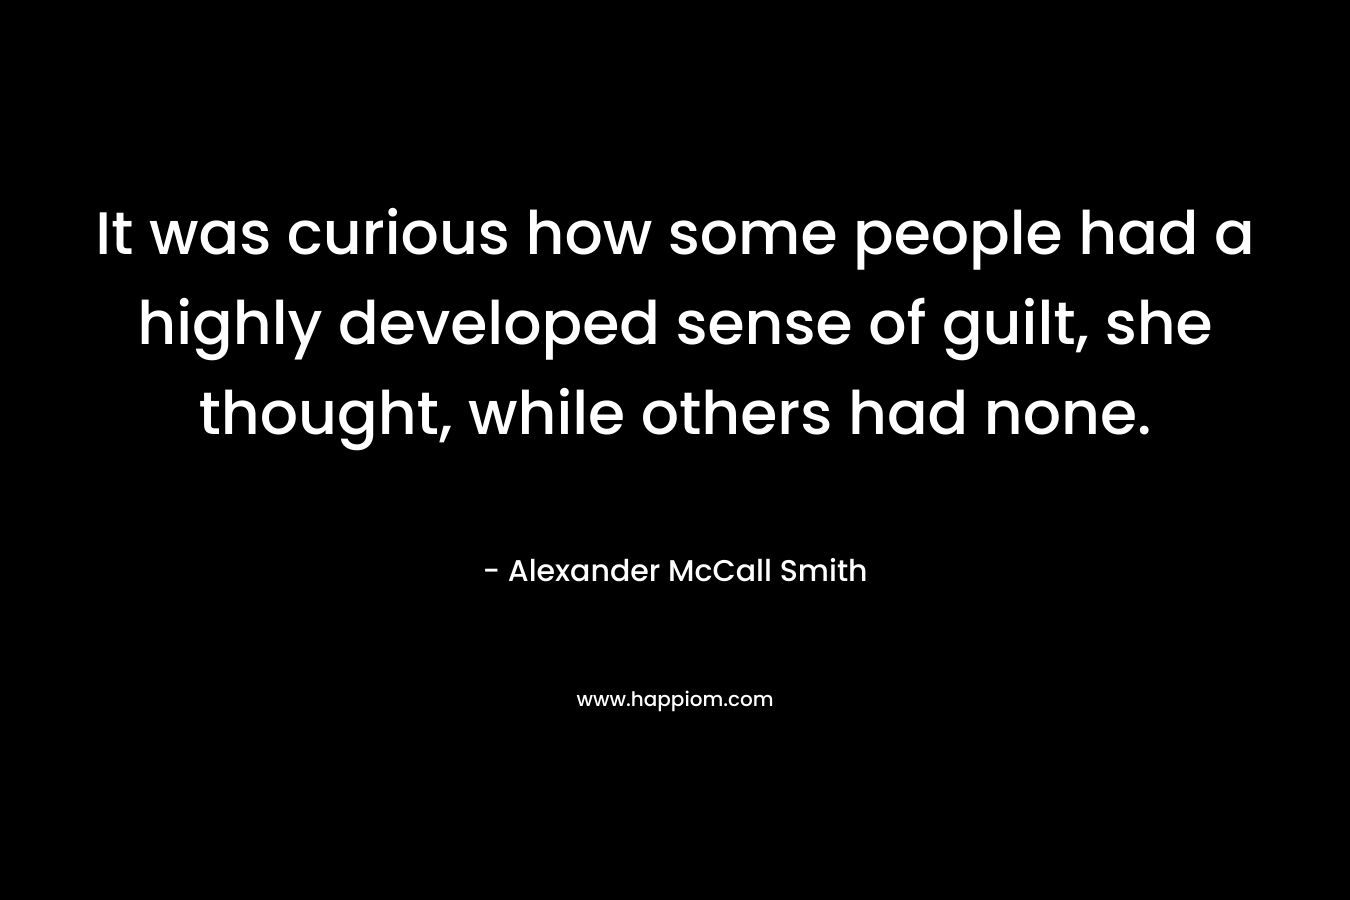 It was curious how some people had a highly developed sense of guilt, she thought, while others had none. – Alexander McCall Smith